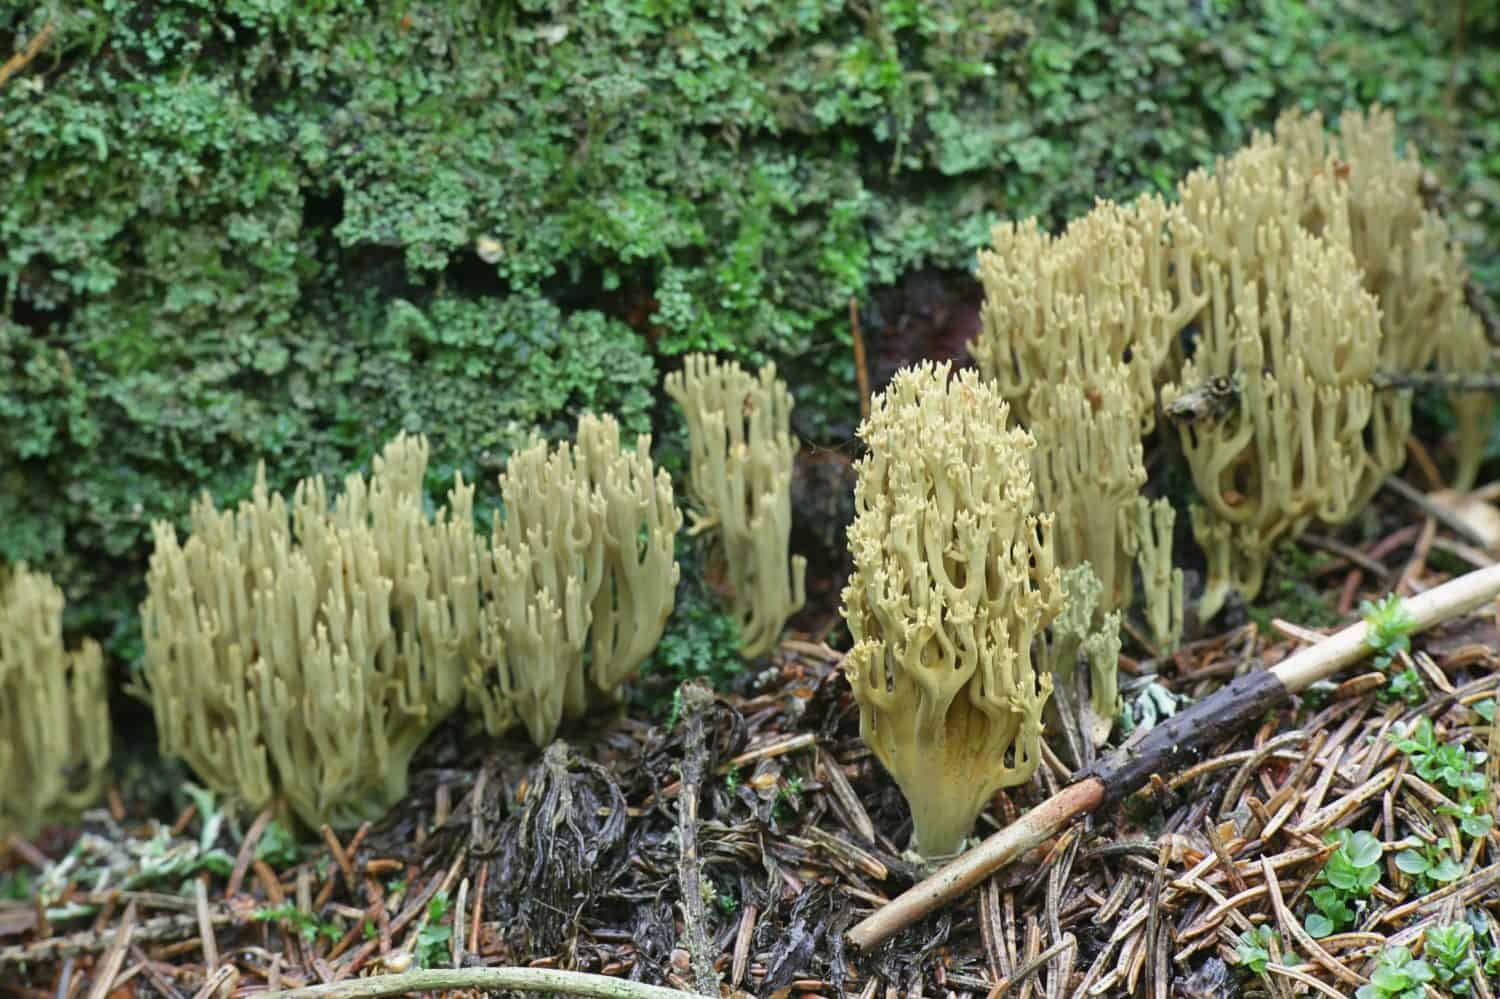 Ramaria abietina, known as the green-staining coral, wild coral fungus from Finland